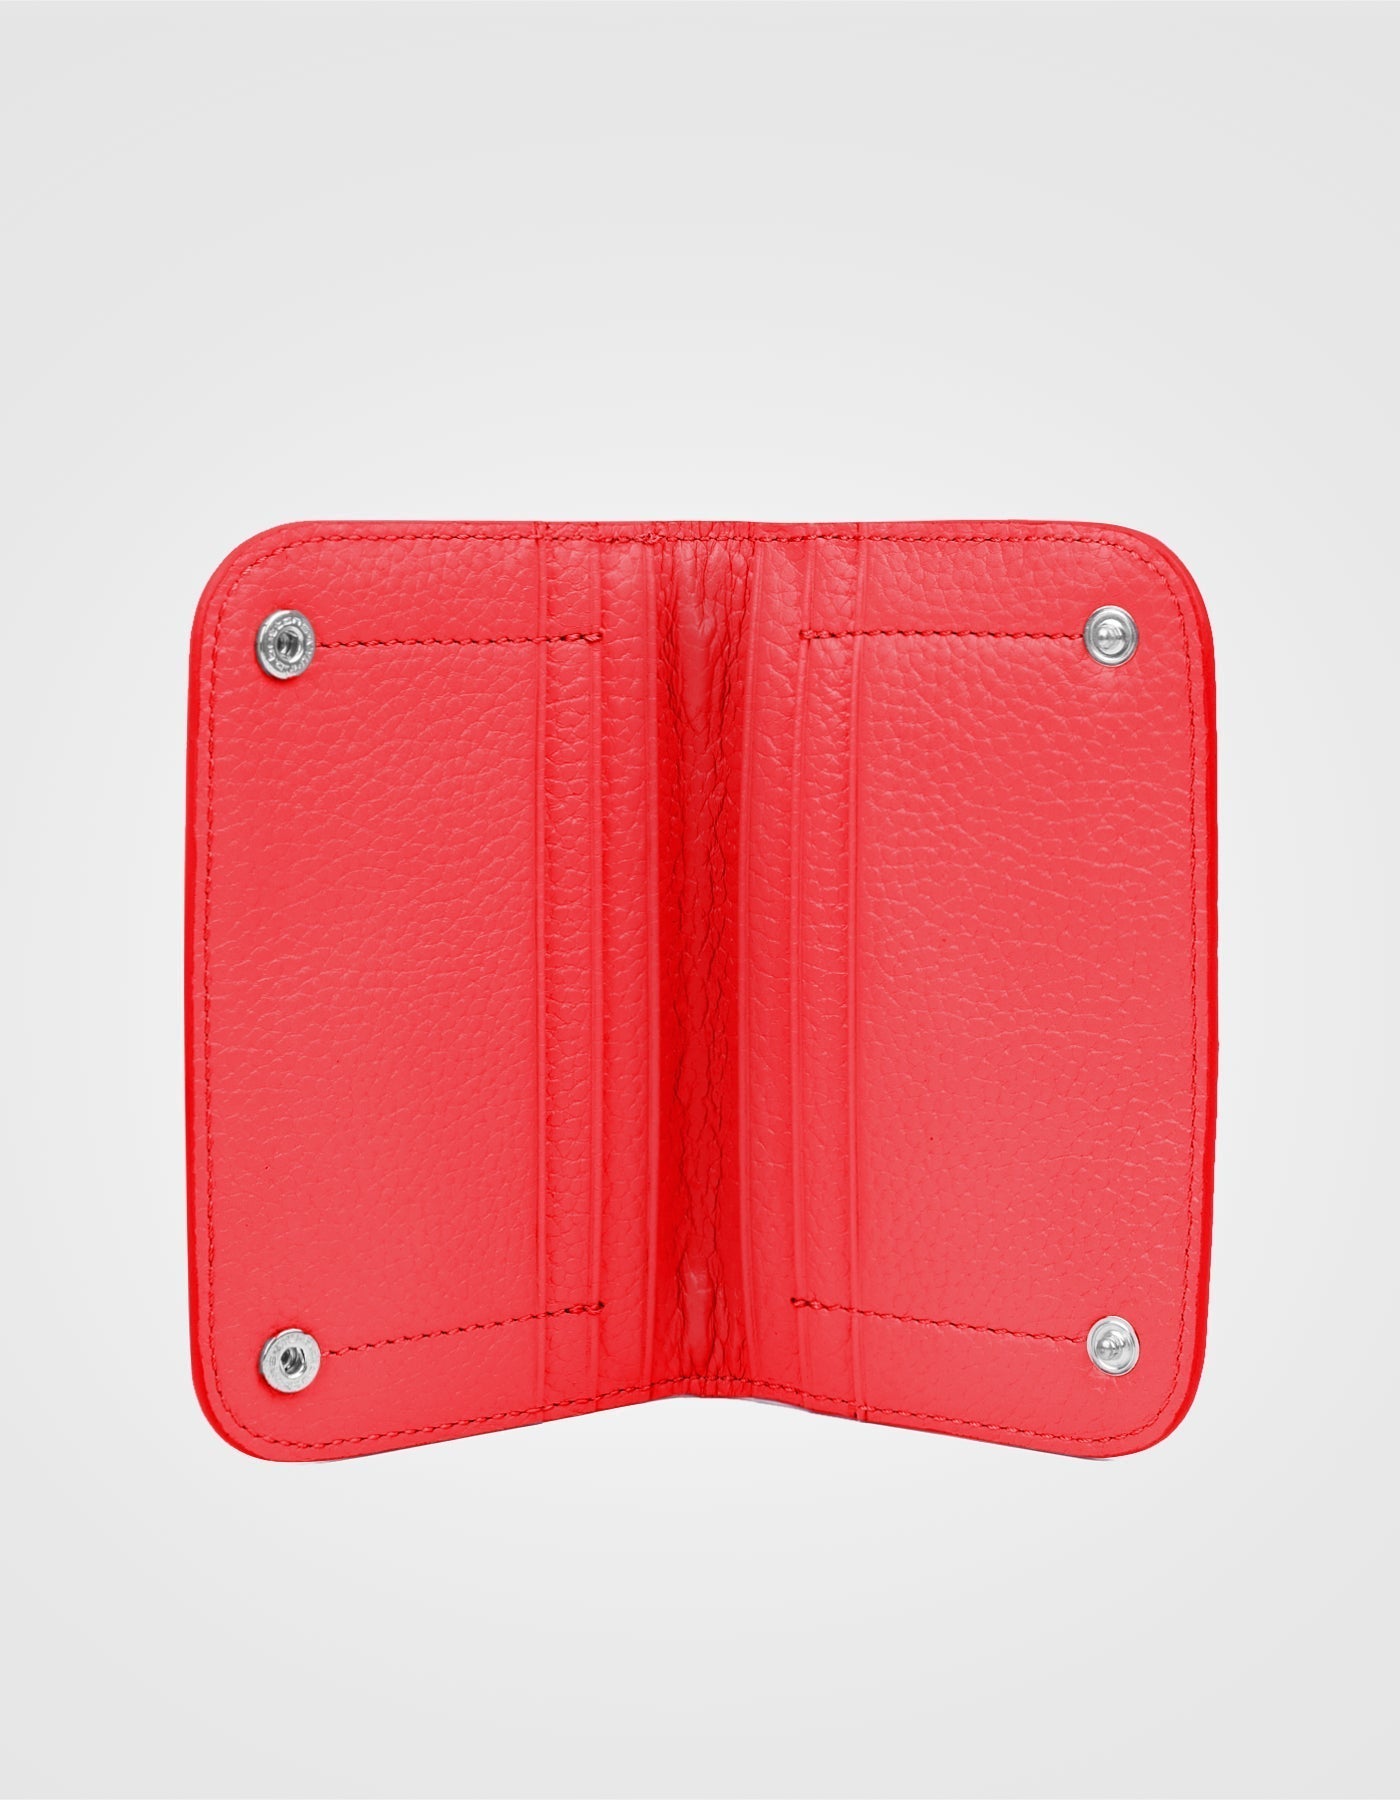 Hiva Atelier | Alae Coin Purse & Card Holder Red | Beautiful and Versatile